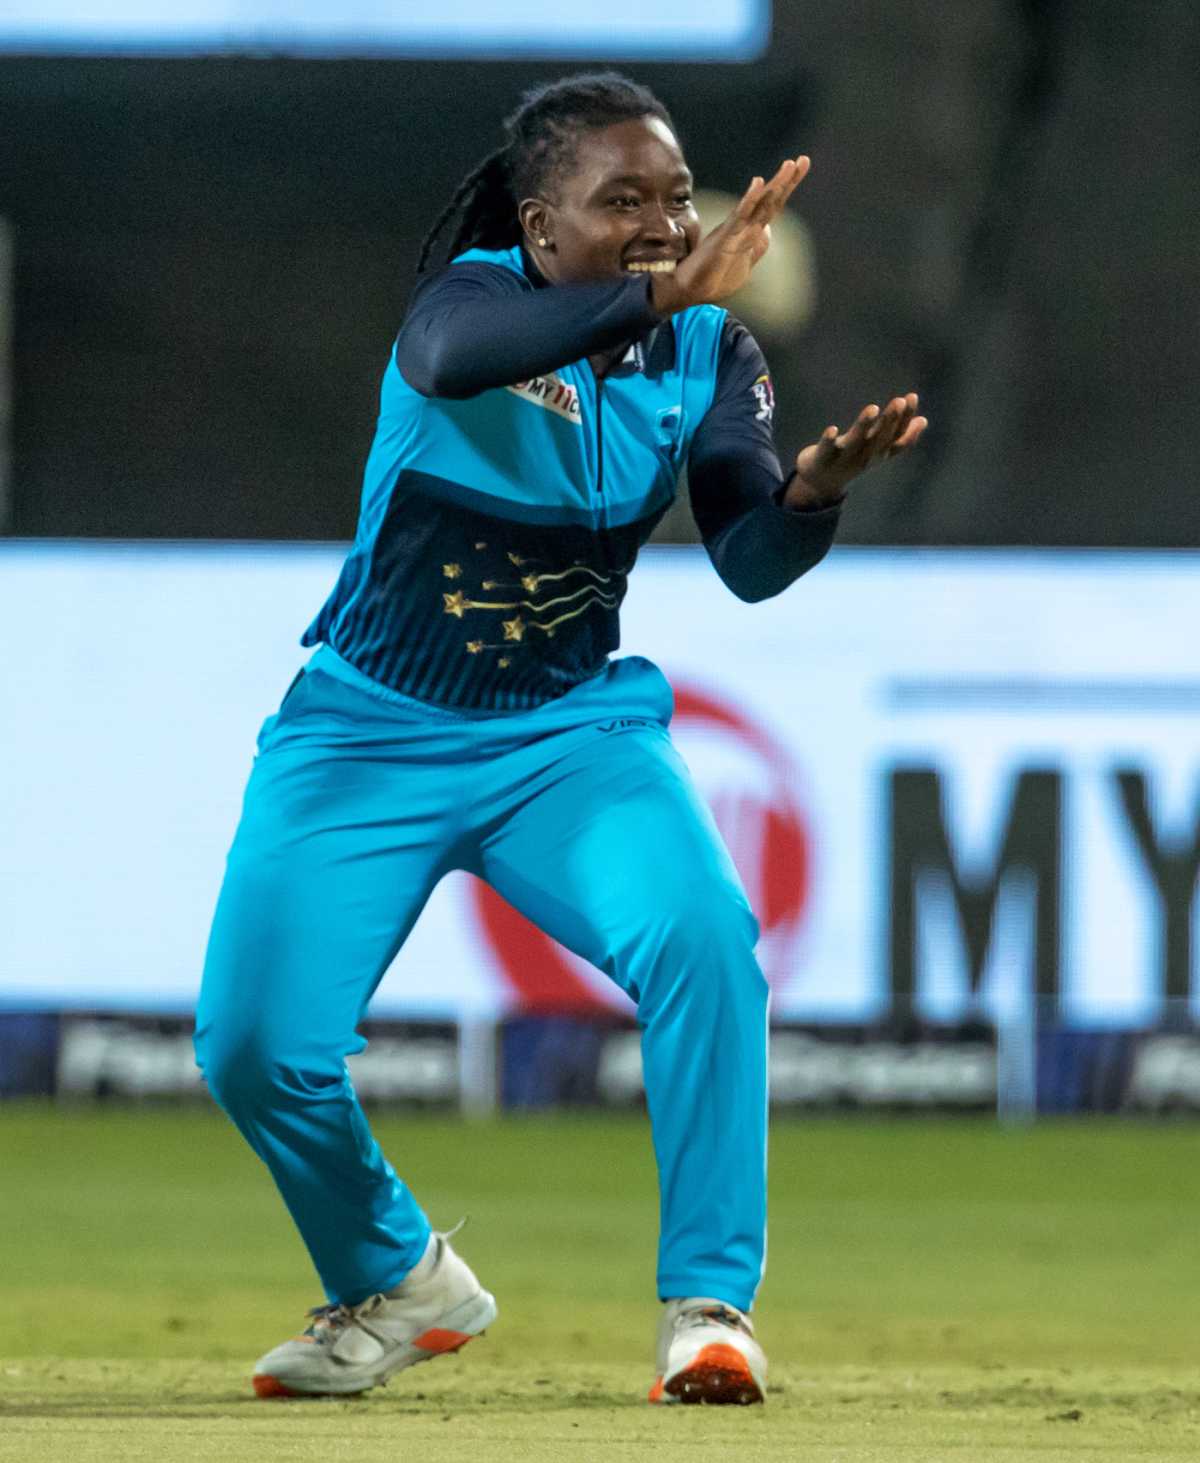 Deandra Dottin is ecstatic after picking up the wicket of Shafali Verma, Supernovas vs Velocity, Final, Women's T20 Challenge 2022, Pune, May 28, 2022